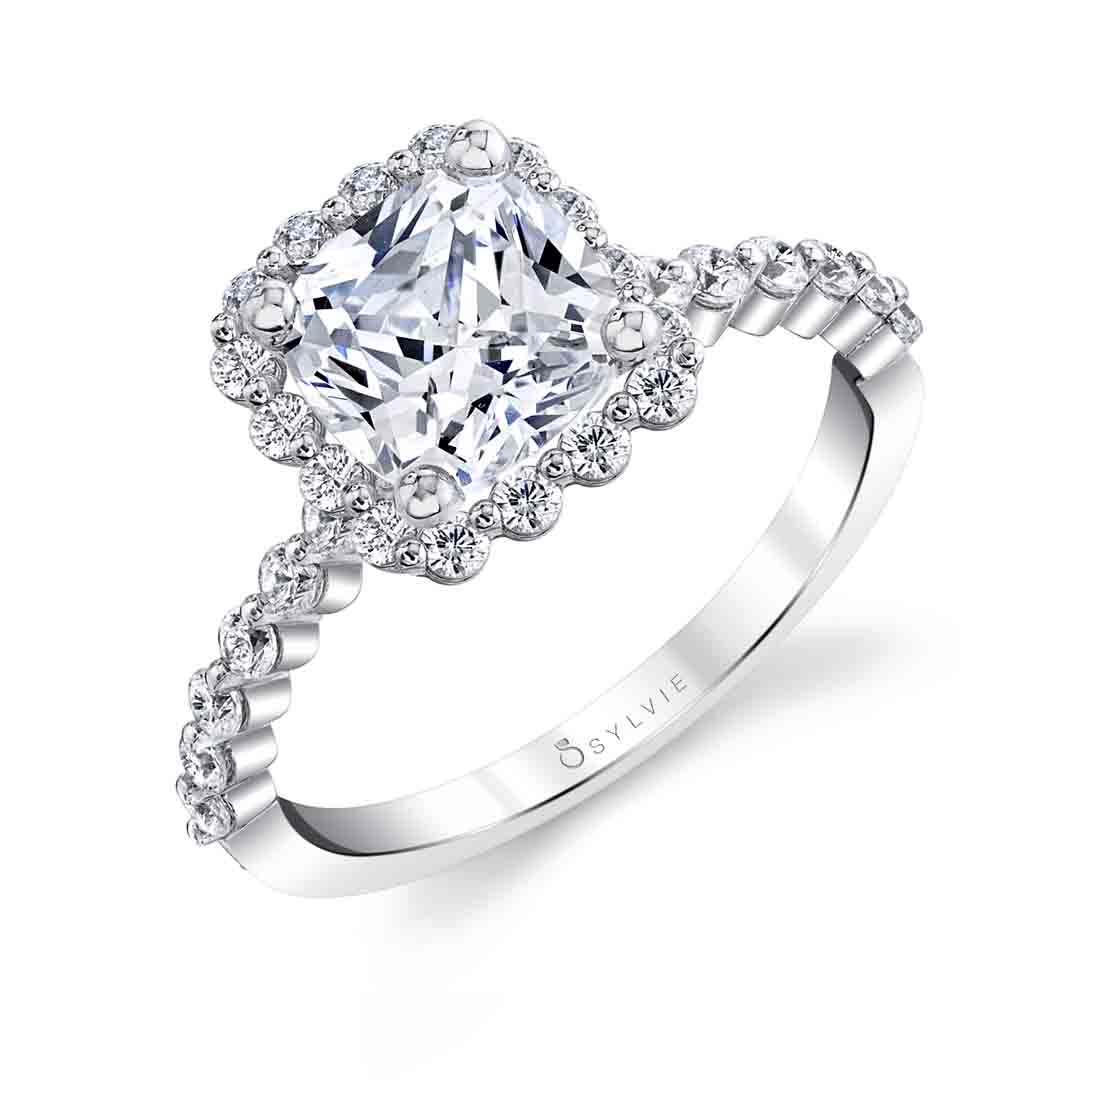 3 carat diamond engagement ring with a shared prong band